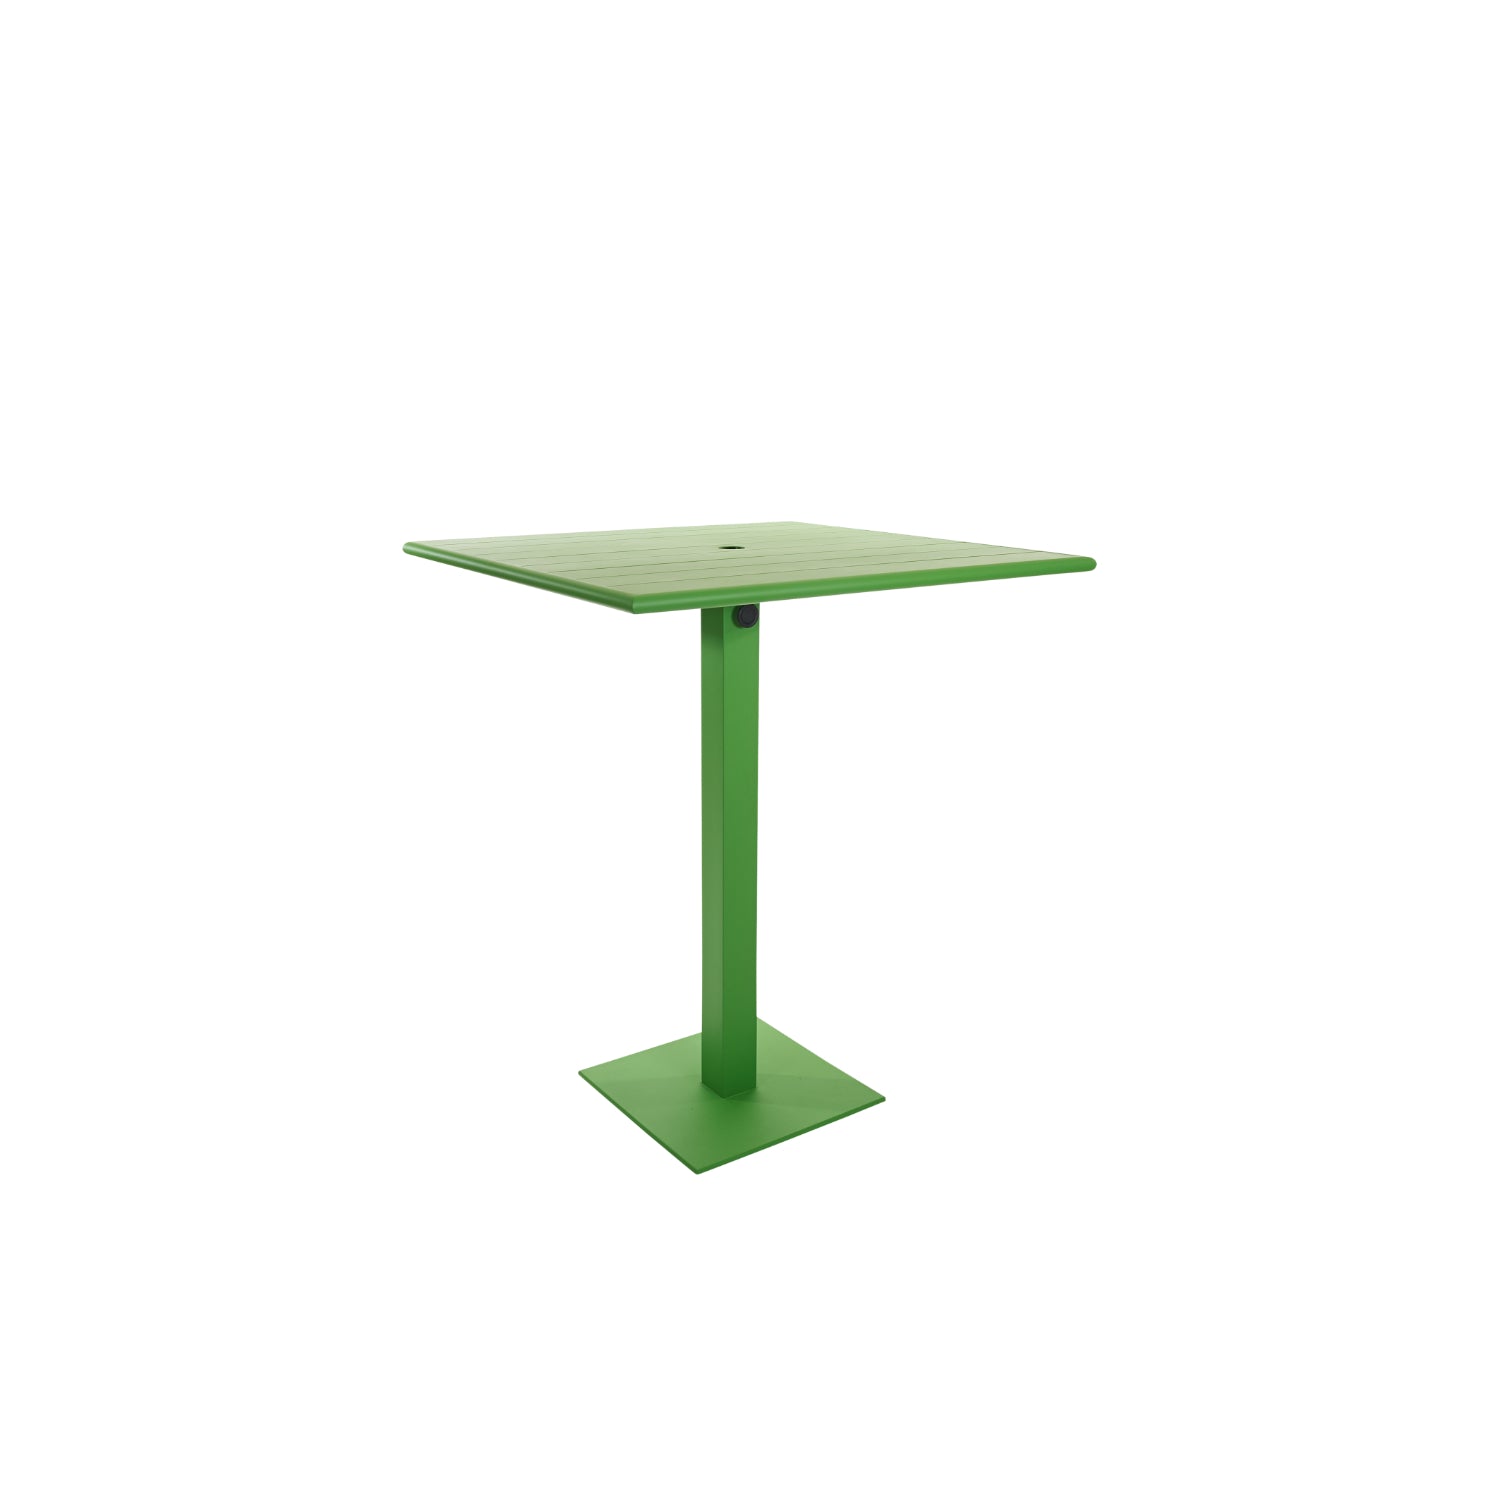 Beachcomber Margate Outdoor/Indoor 32" Square Aluminum Bar Height Table with Umbrella Hole